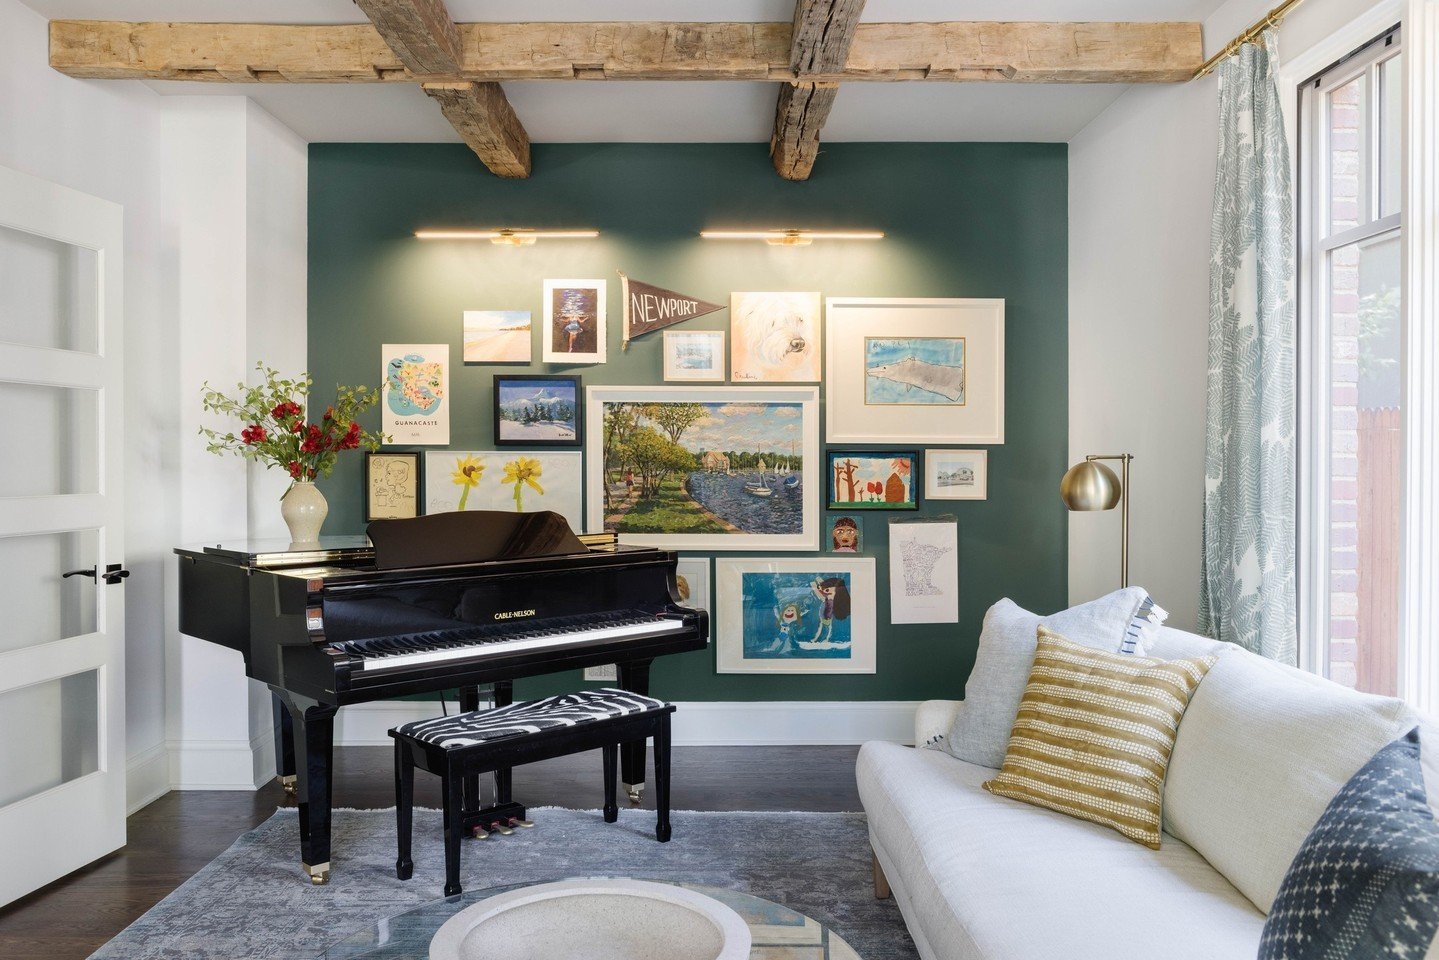 If there's a classic trend we never want to see vanish, it's gallery walls. The perfect display for all mementos, family pics - even kid drawings! In the right frames, in the proper context (eg. bold accent wall), it all comes together. And the secre